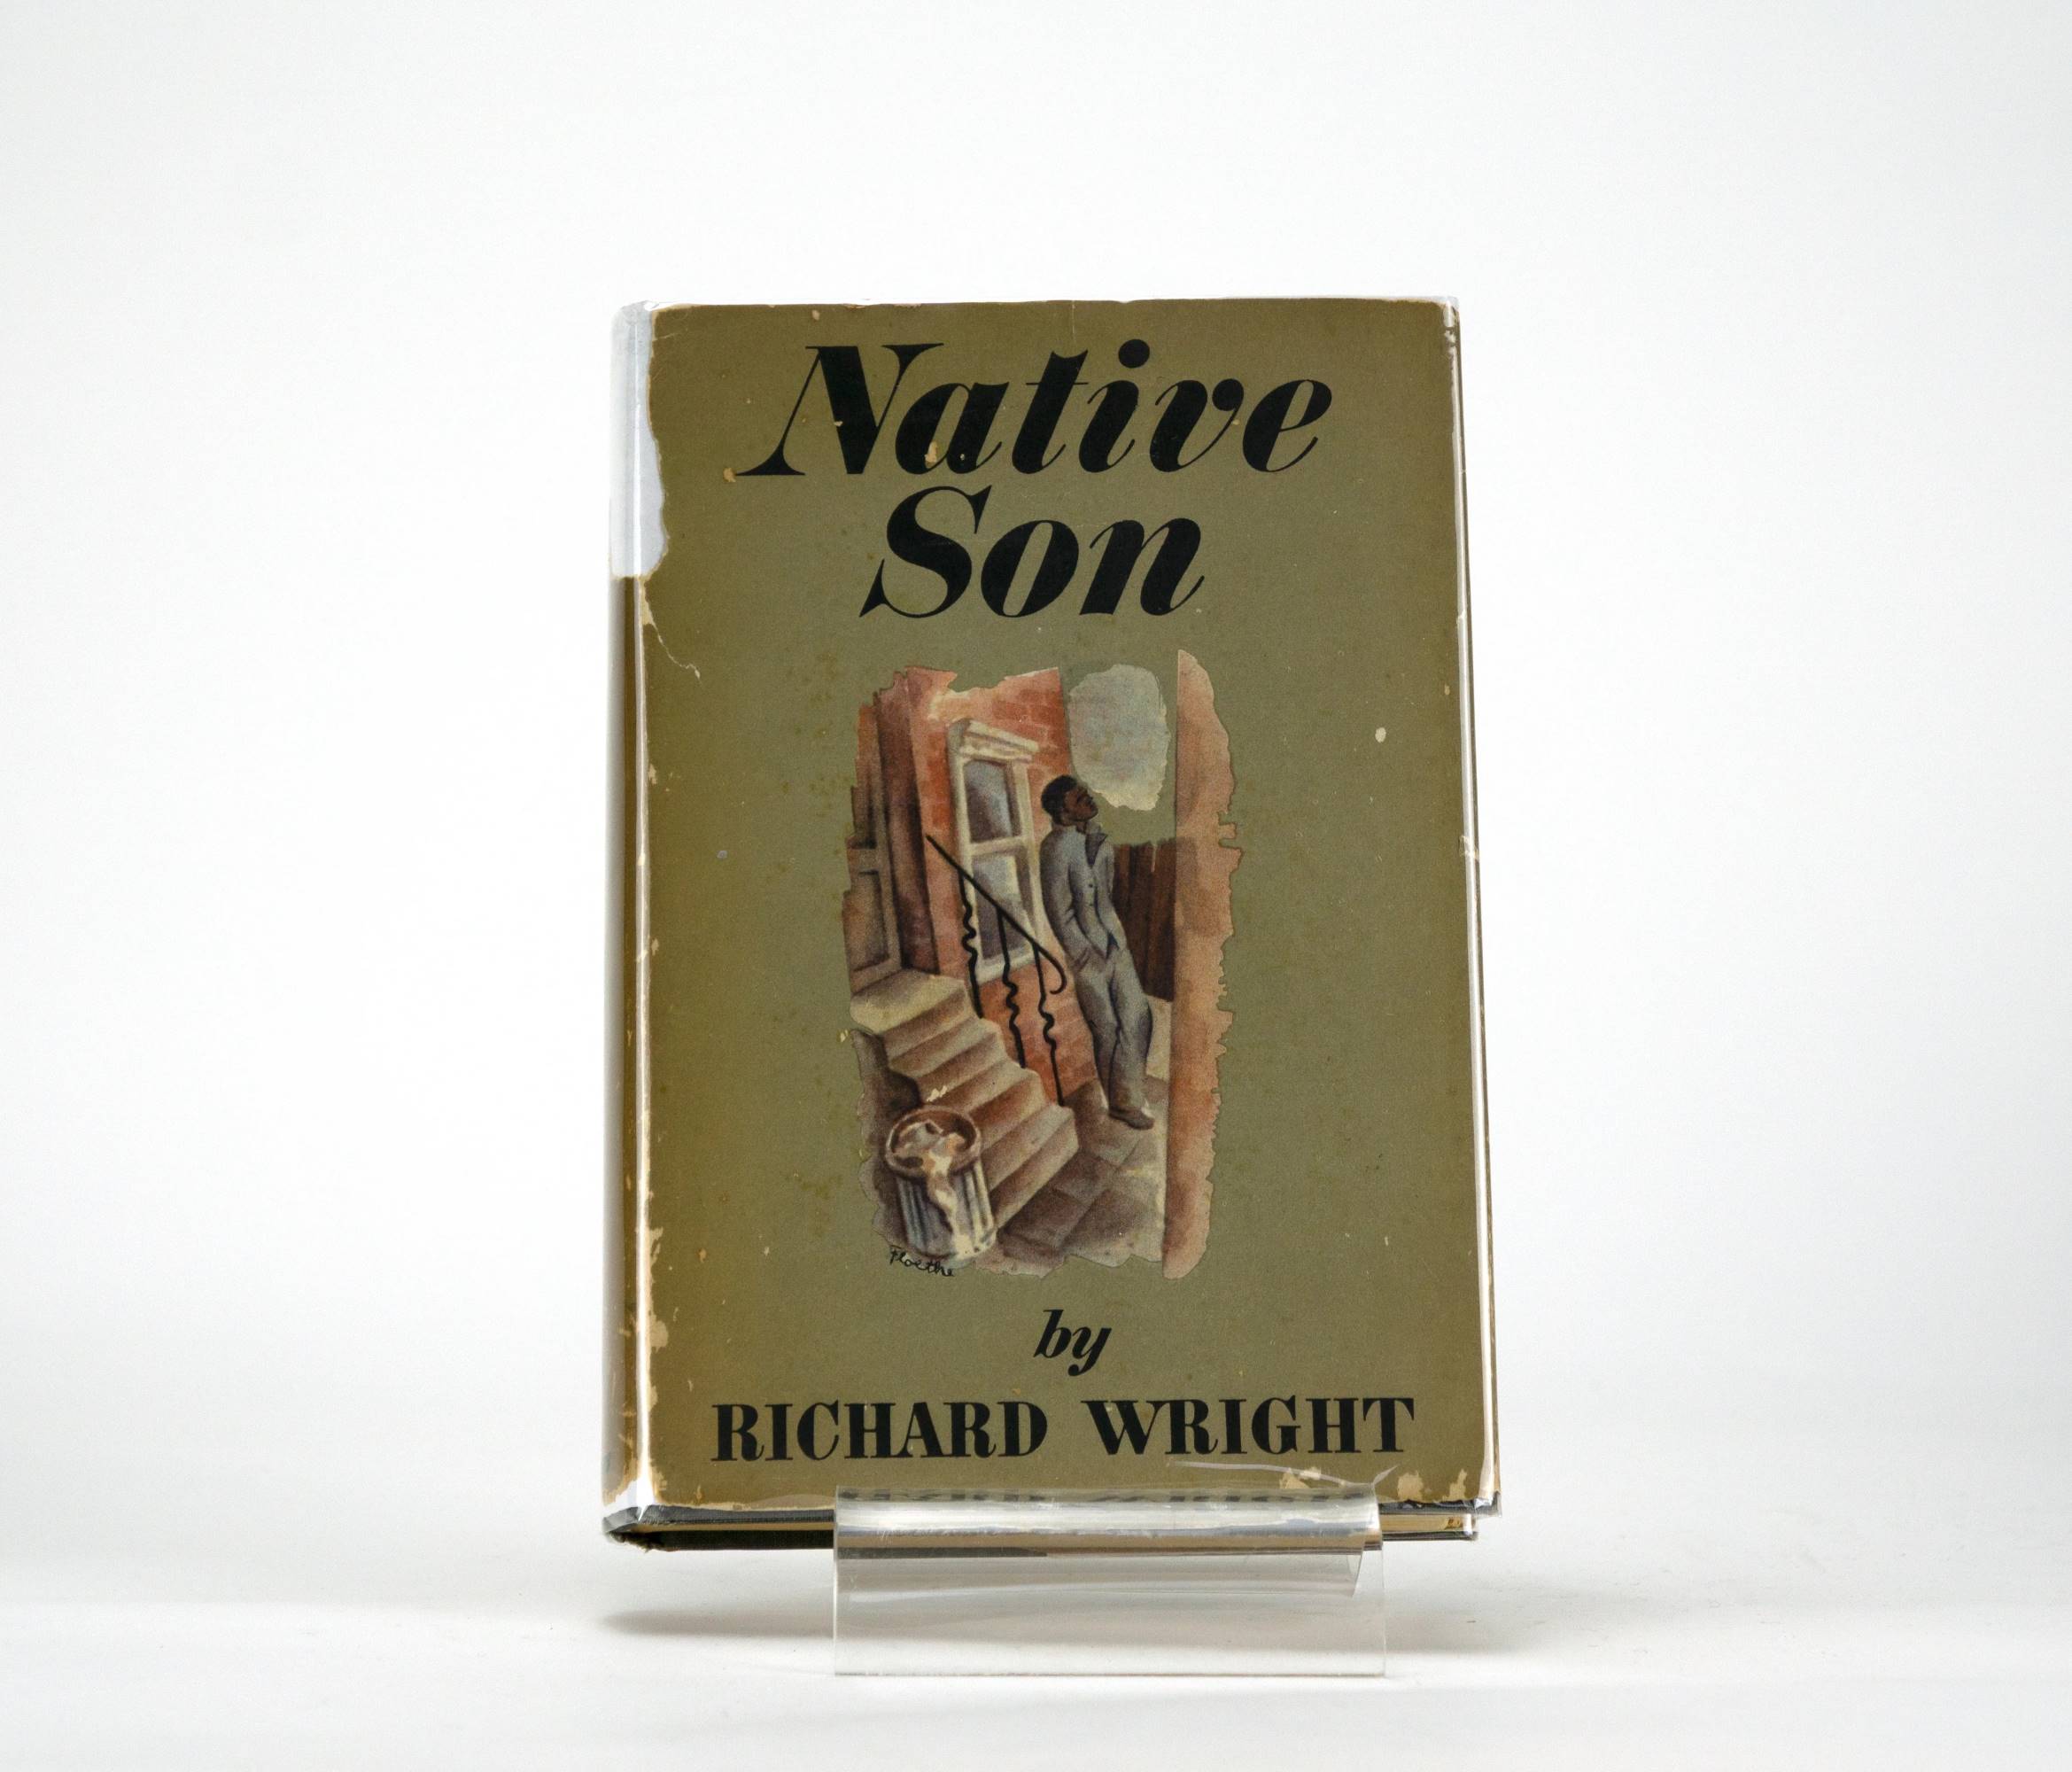 15-extraordinary-facts-about-native-son-richard-wright